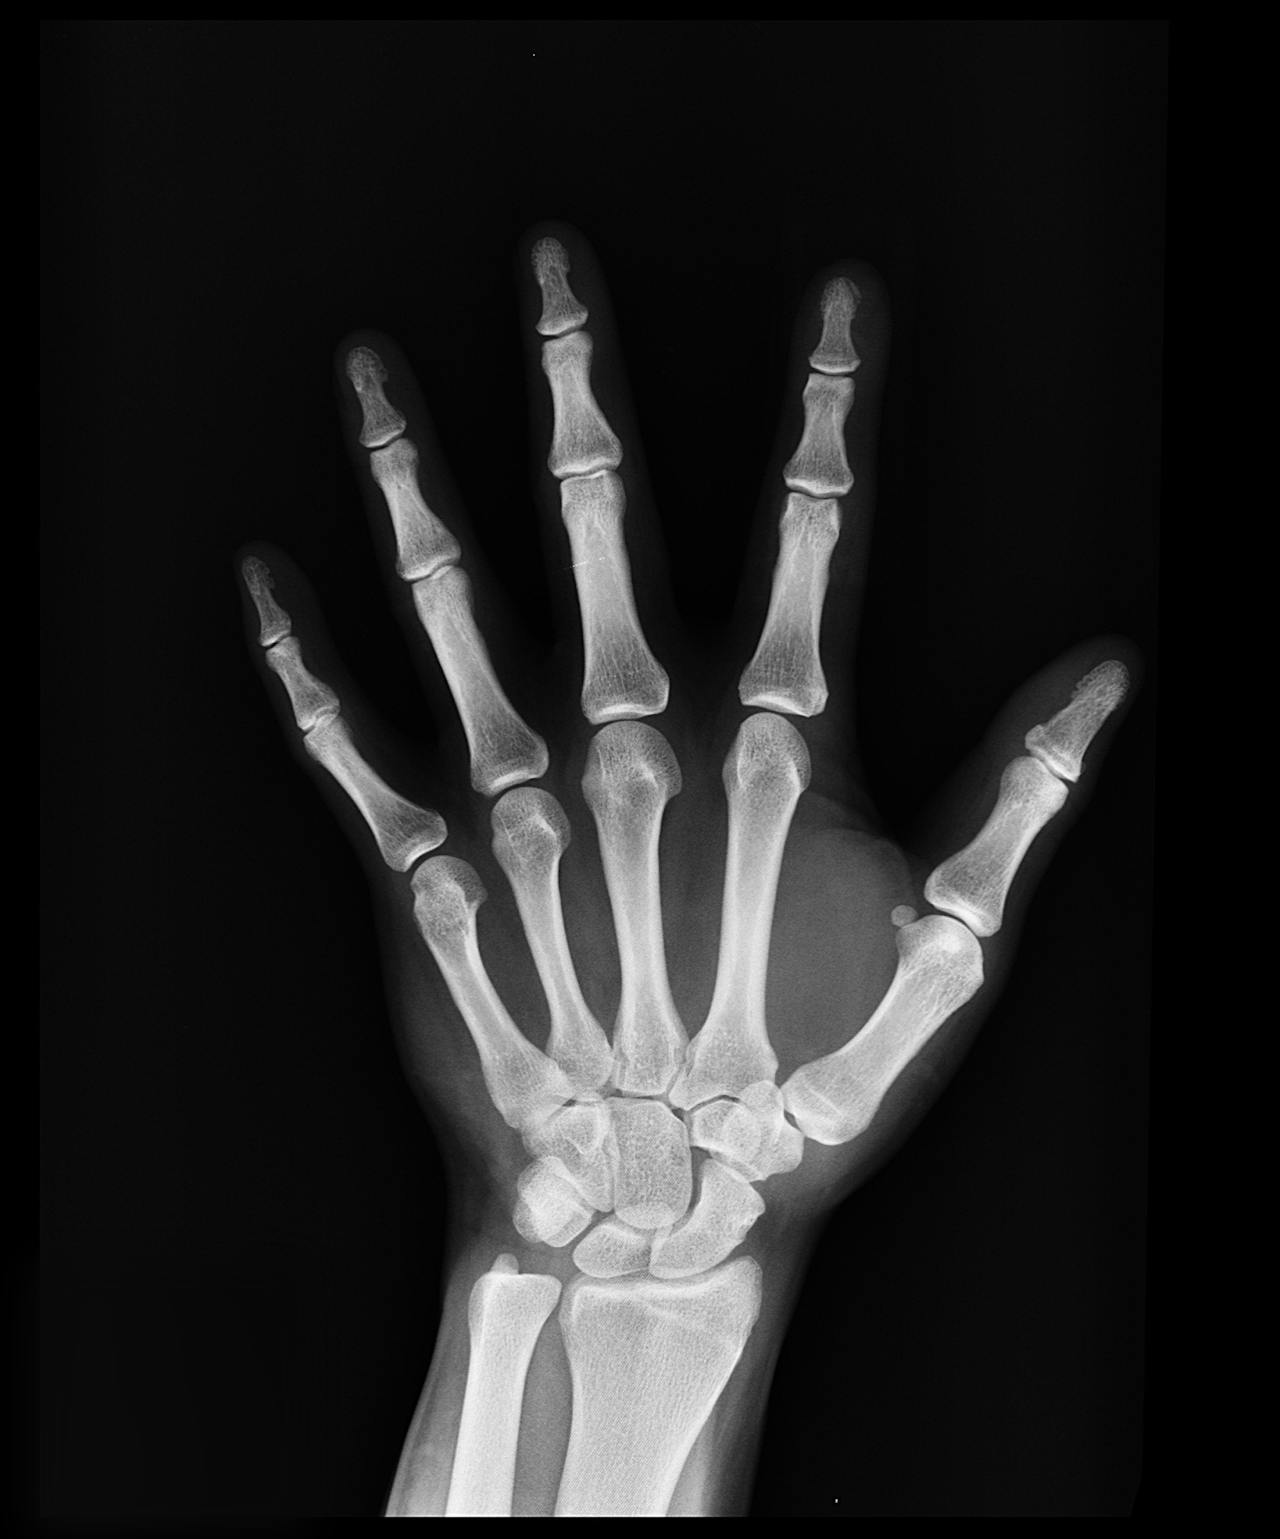 x-ray image of a hand